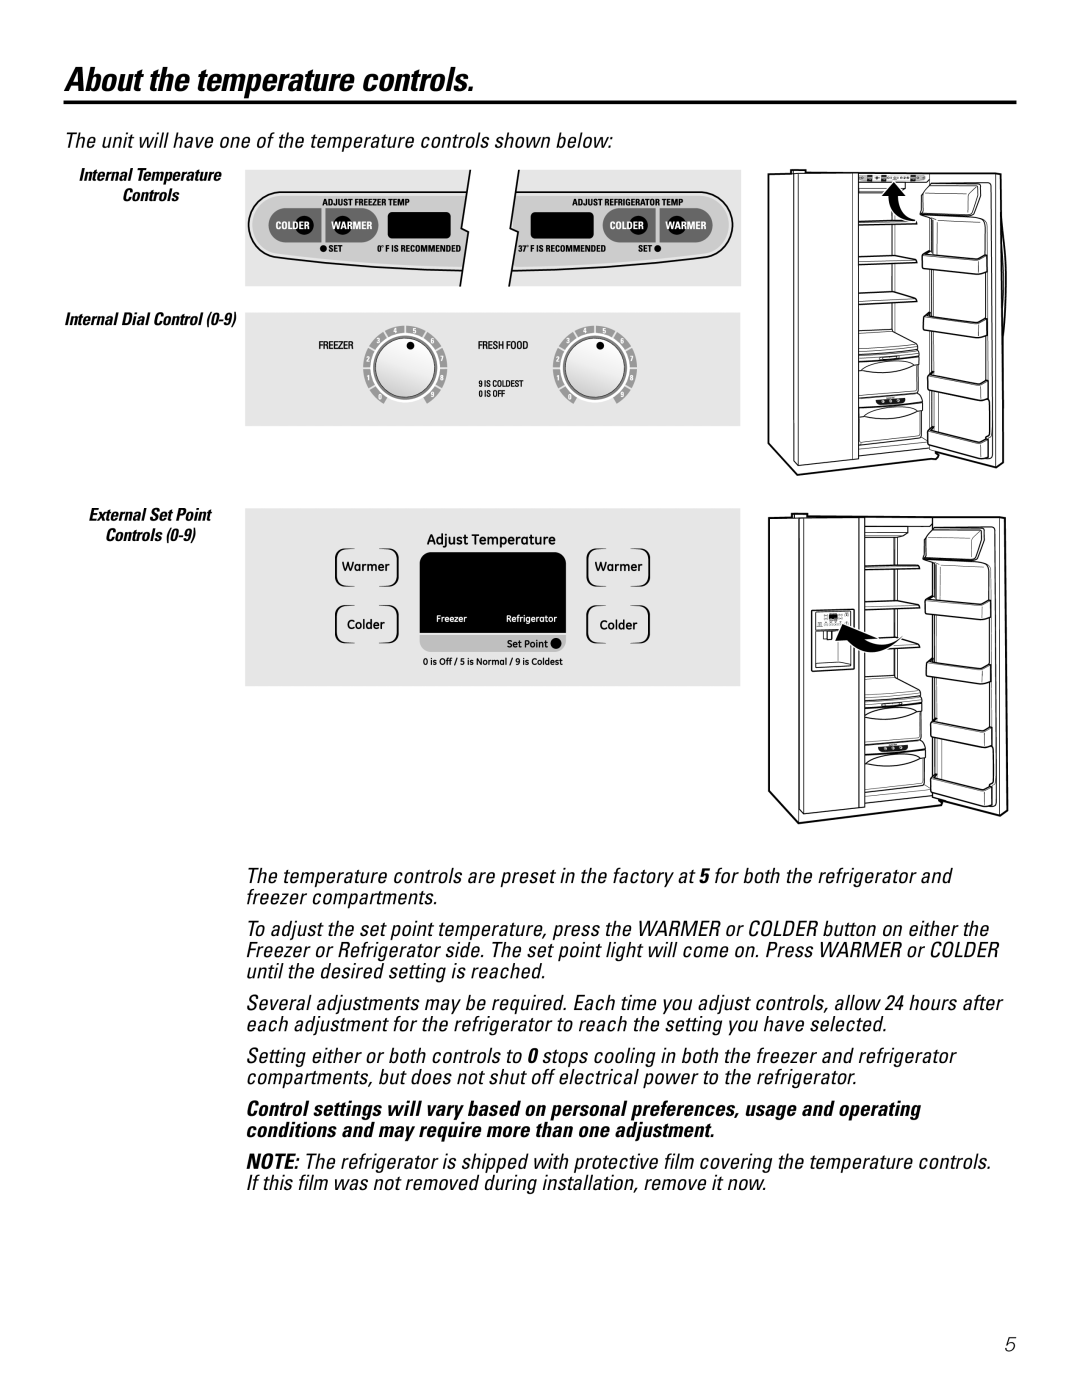 GE 21, 23, 25, 27, 29 About the temperature controls, The unit will have one of the temperature controls shown below 